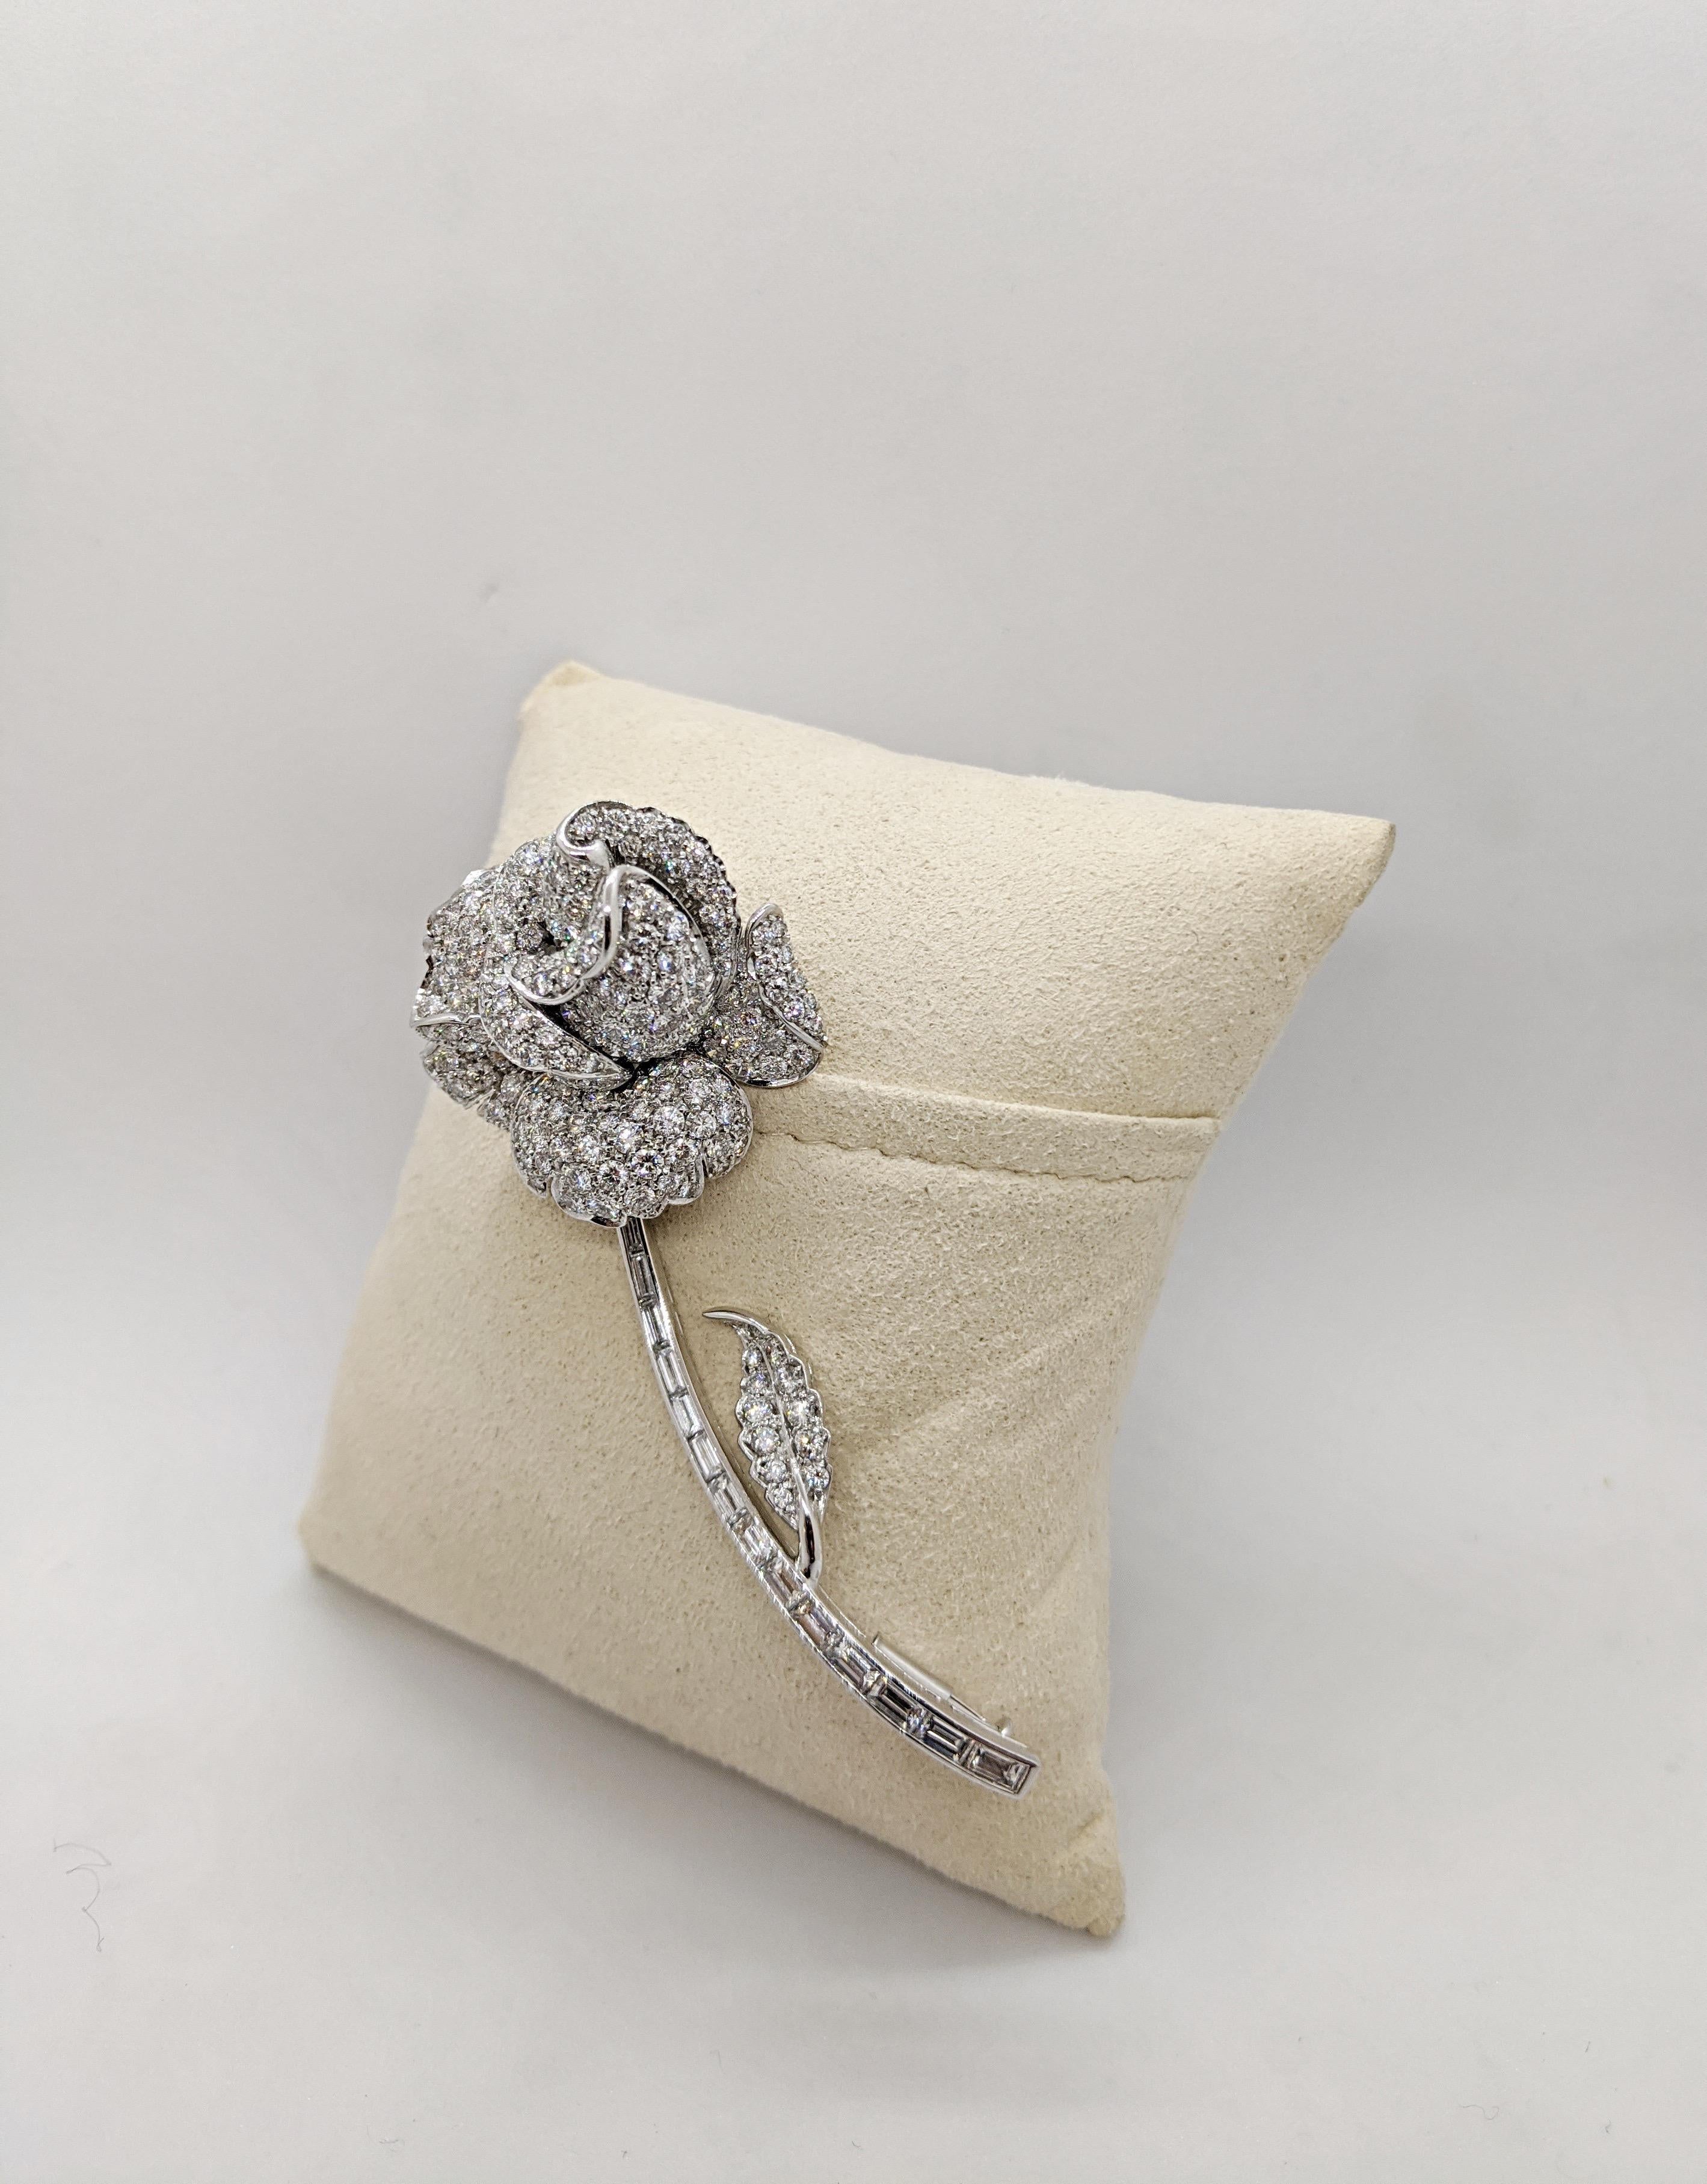 Crafted by the famed Italian designer Guiseppe Picchiotti, this brooch is a perfect example of his meticulous work. Set in 18 karat white gold this brooch is designed as a beautiful single rose. The exquisitely sculpted petals are set with round